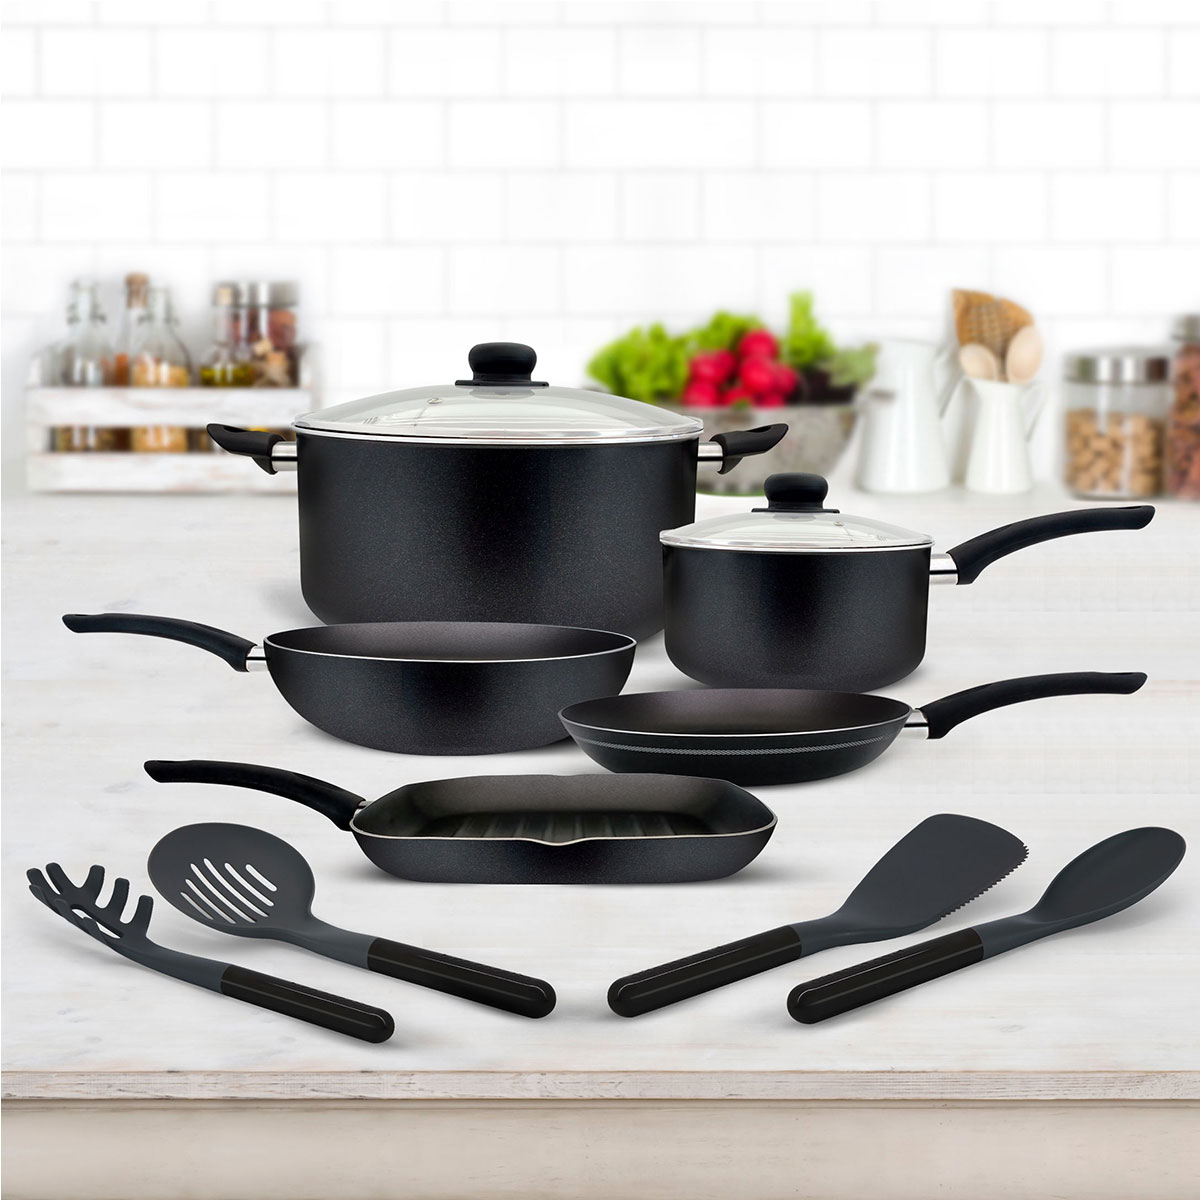 Rossetti® Milano 20 Piece Made in Italy Quality Cookware Set Collezione  Non Stick Dishwasher Safe PFOA free Metallic Black Cooking Set